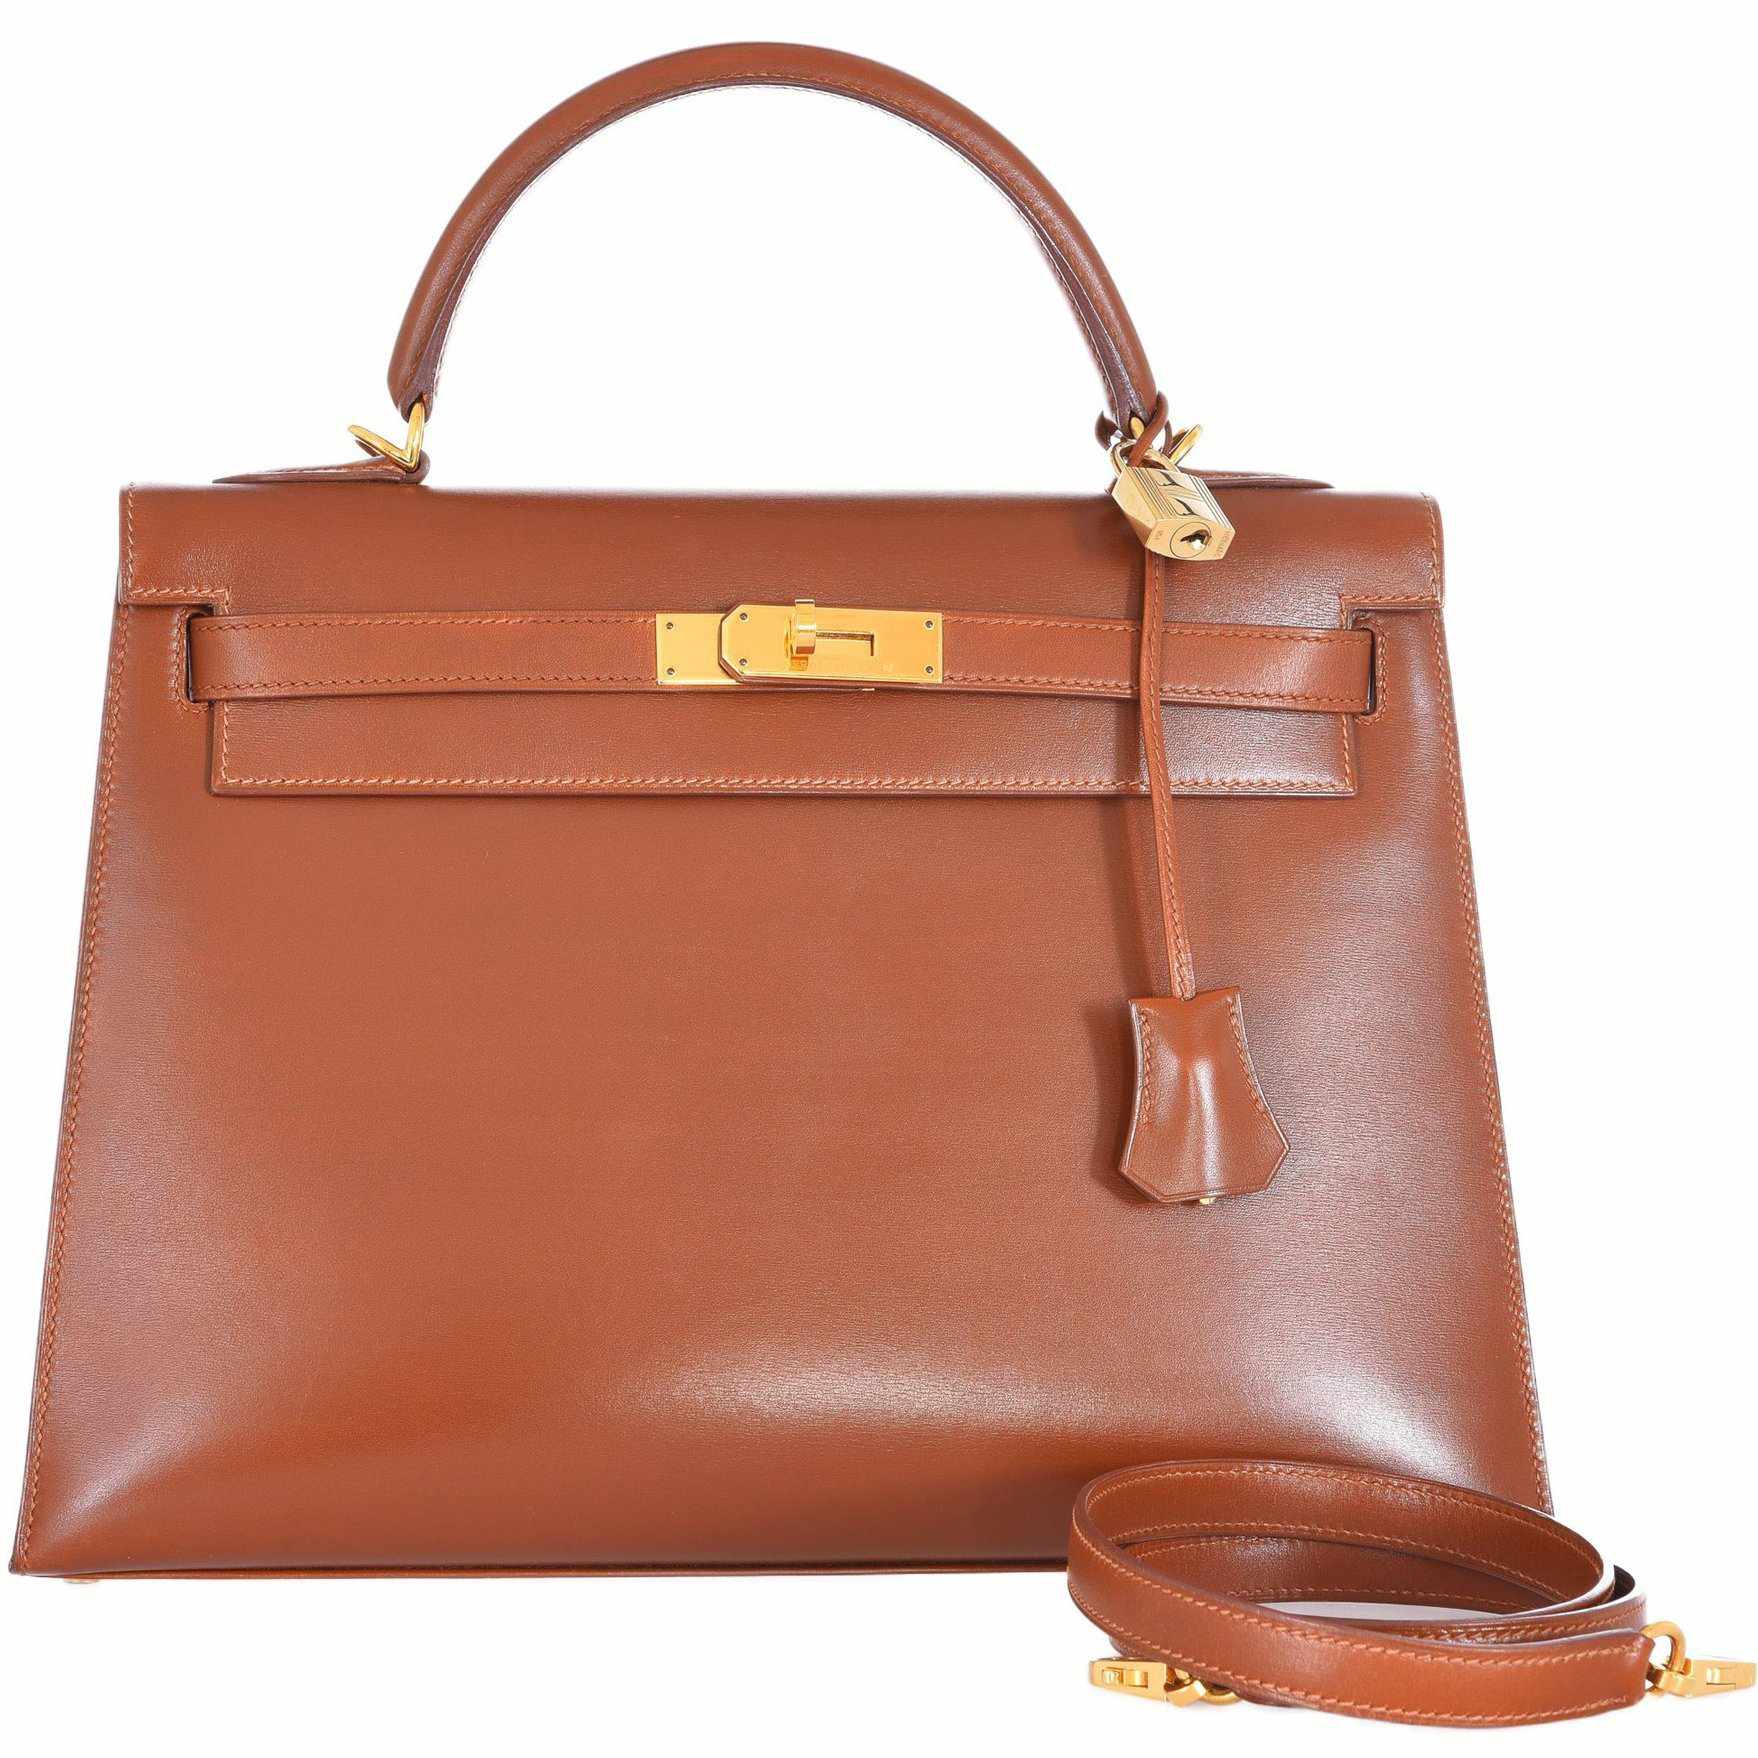 Hermes Tri-color Box Leather Sellier Kelly 28cm